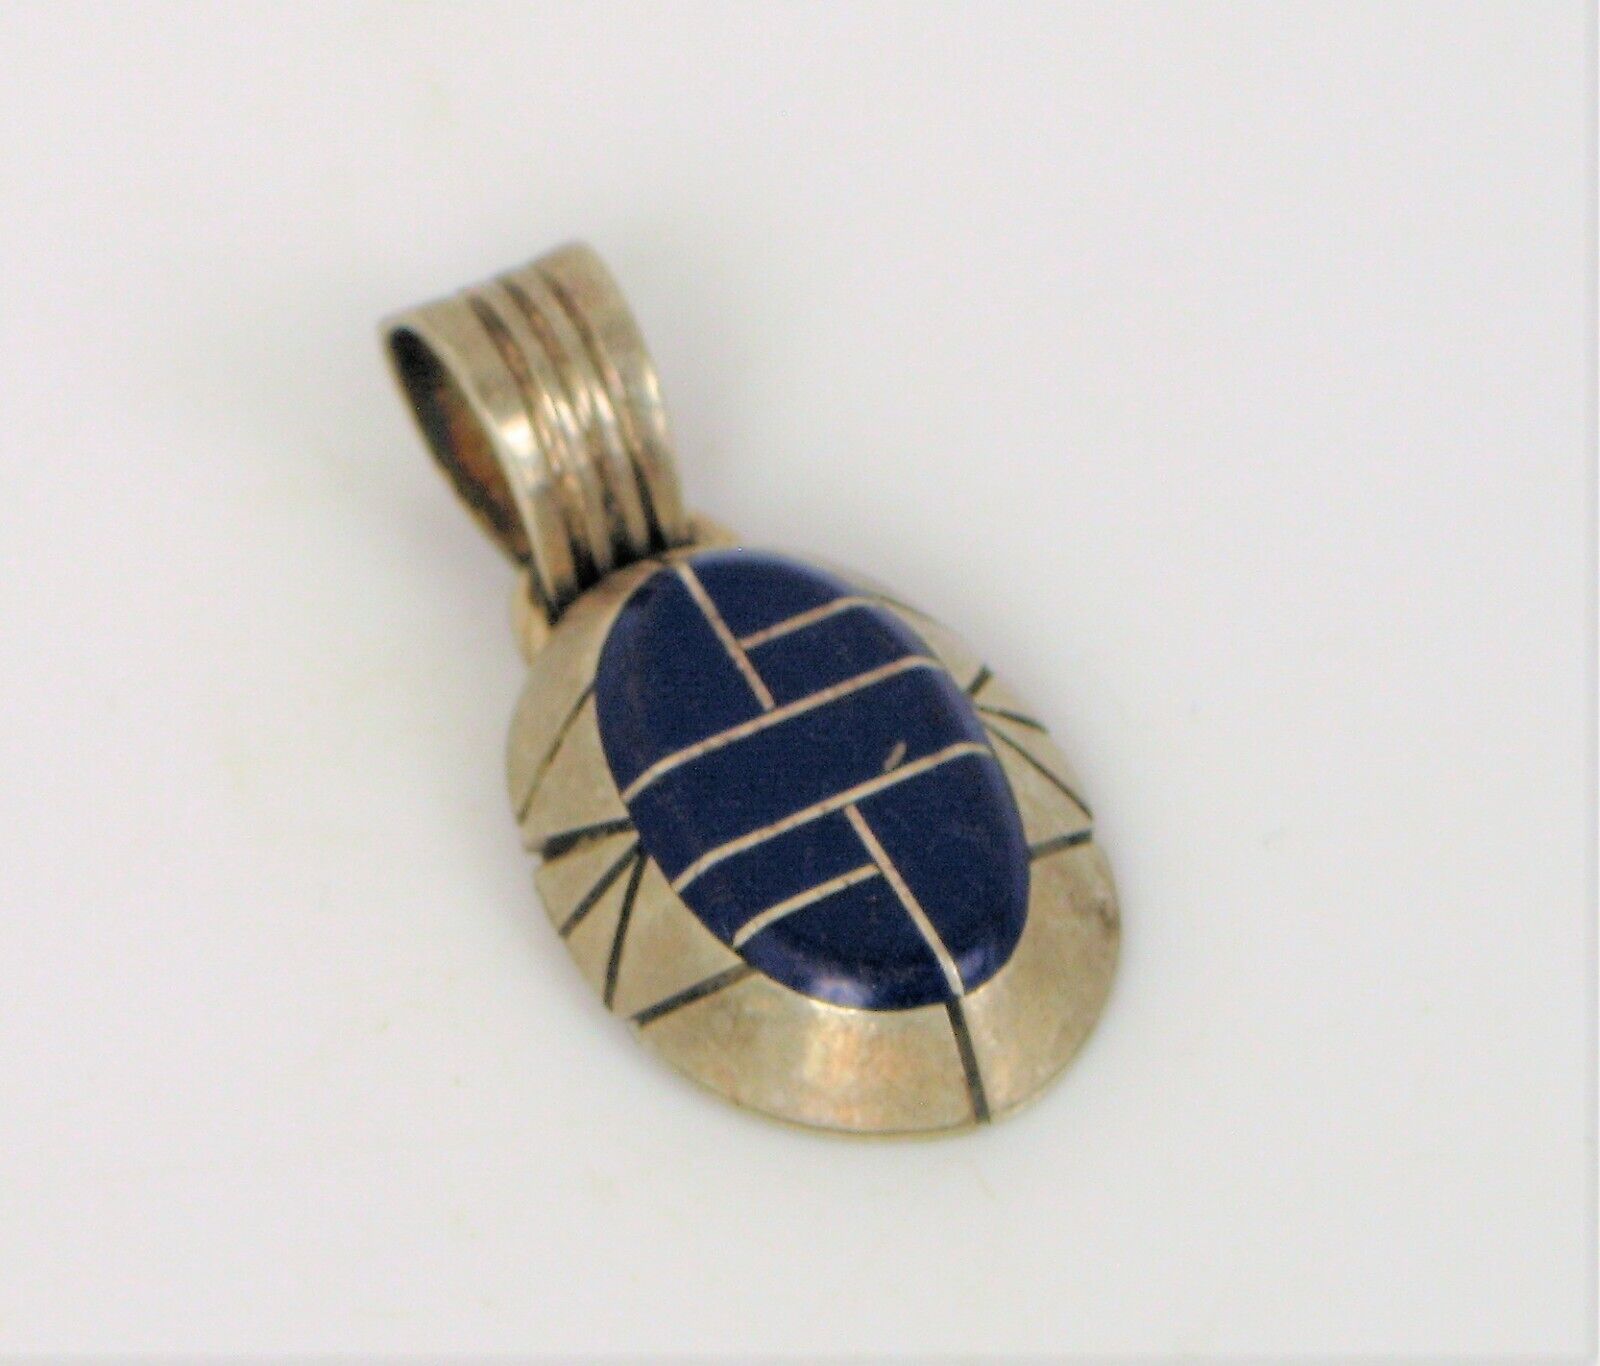 VTG STERLING SILVER NATIVE AMERICAN PENDANT SIGNED LT NICE BLUE LAPIS INLAY 